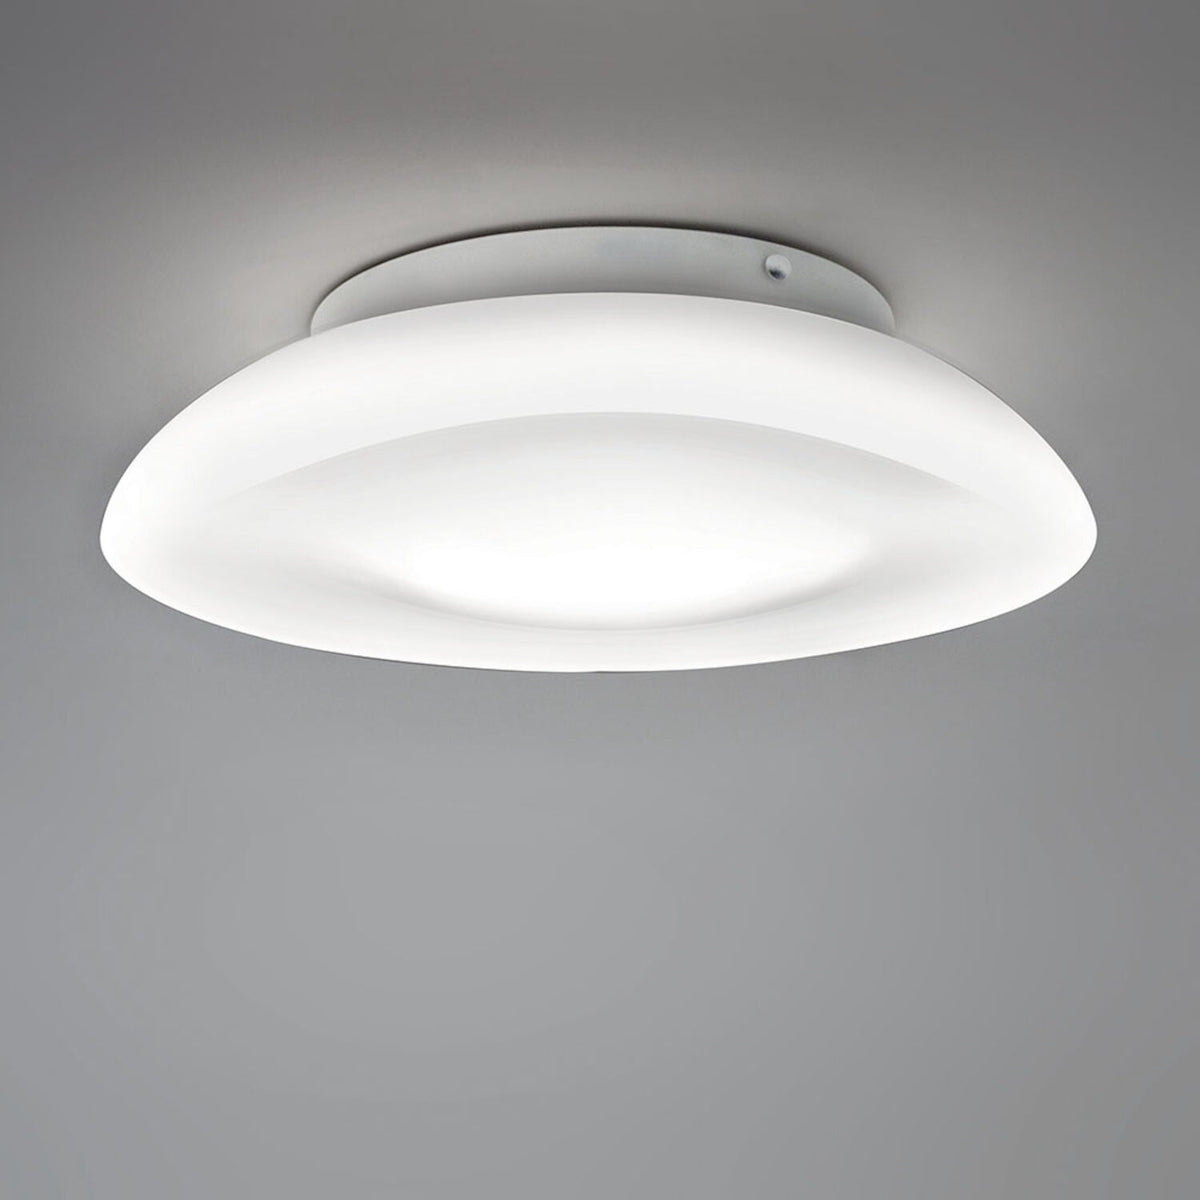 LUNEX 15-INCH WALL/CEILING LIGHT DIMMABLE